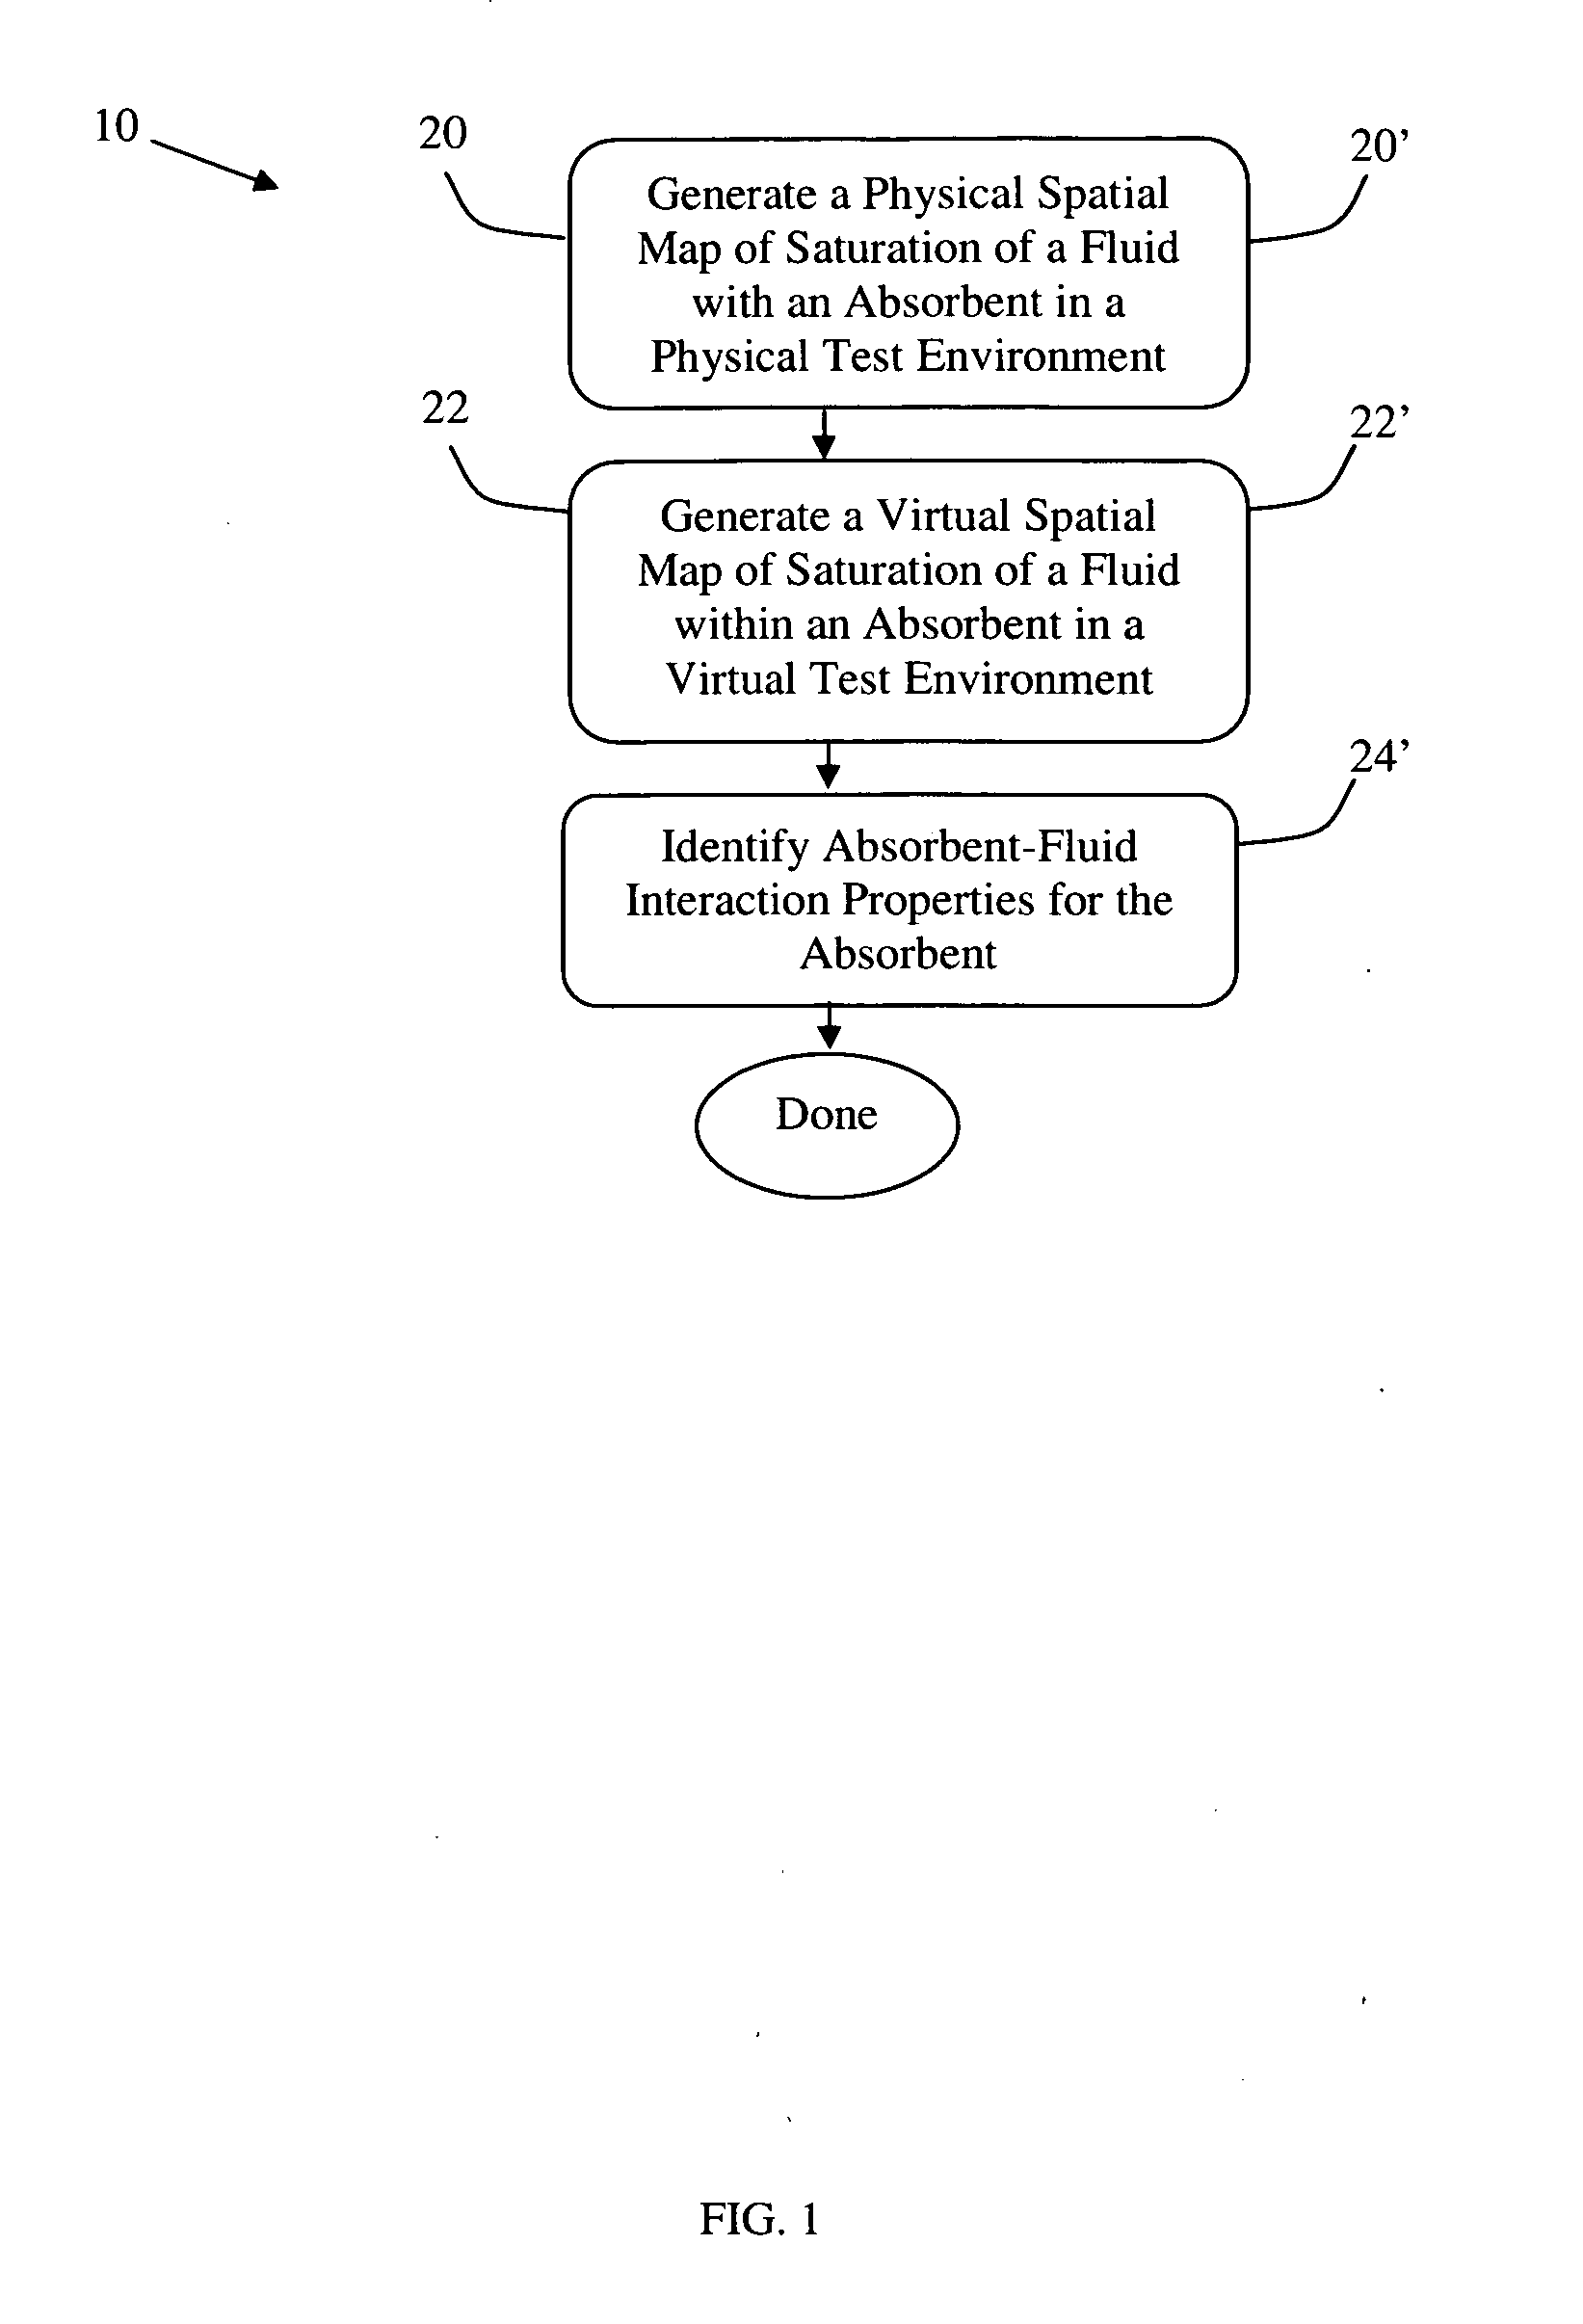 Method for measuring the partially saturated fluid transport properties of an absorbent